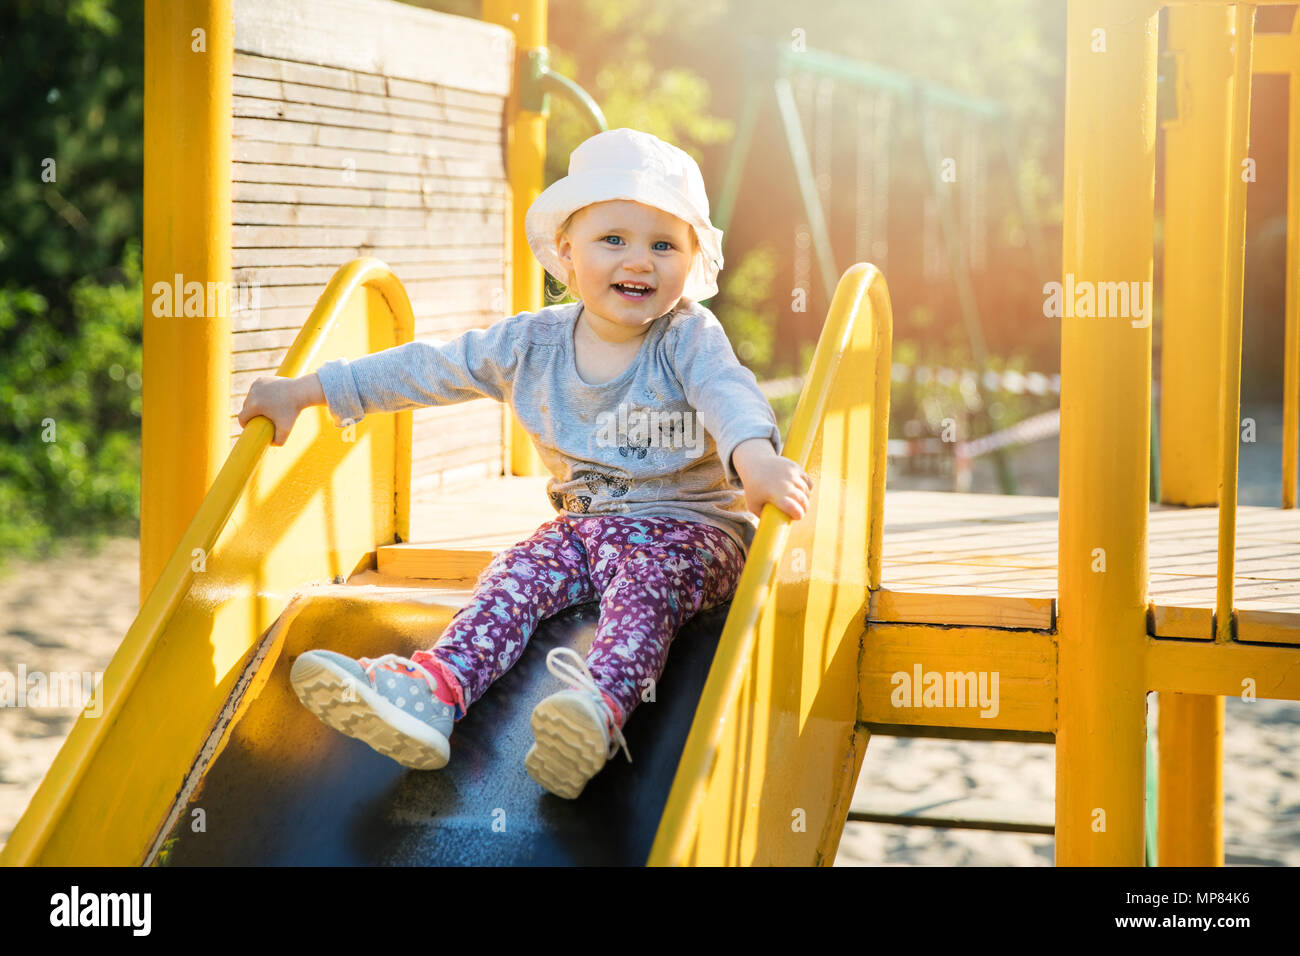 happy smiling child on slider at outdoor playground Stock Photo